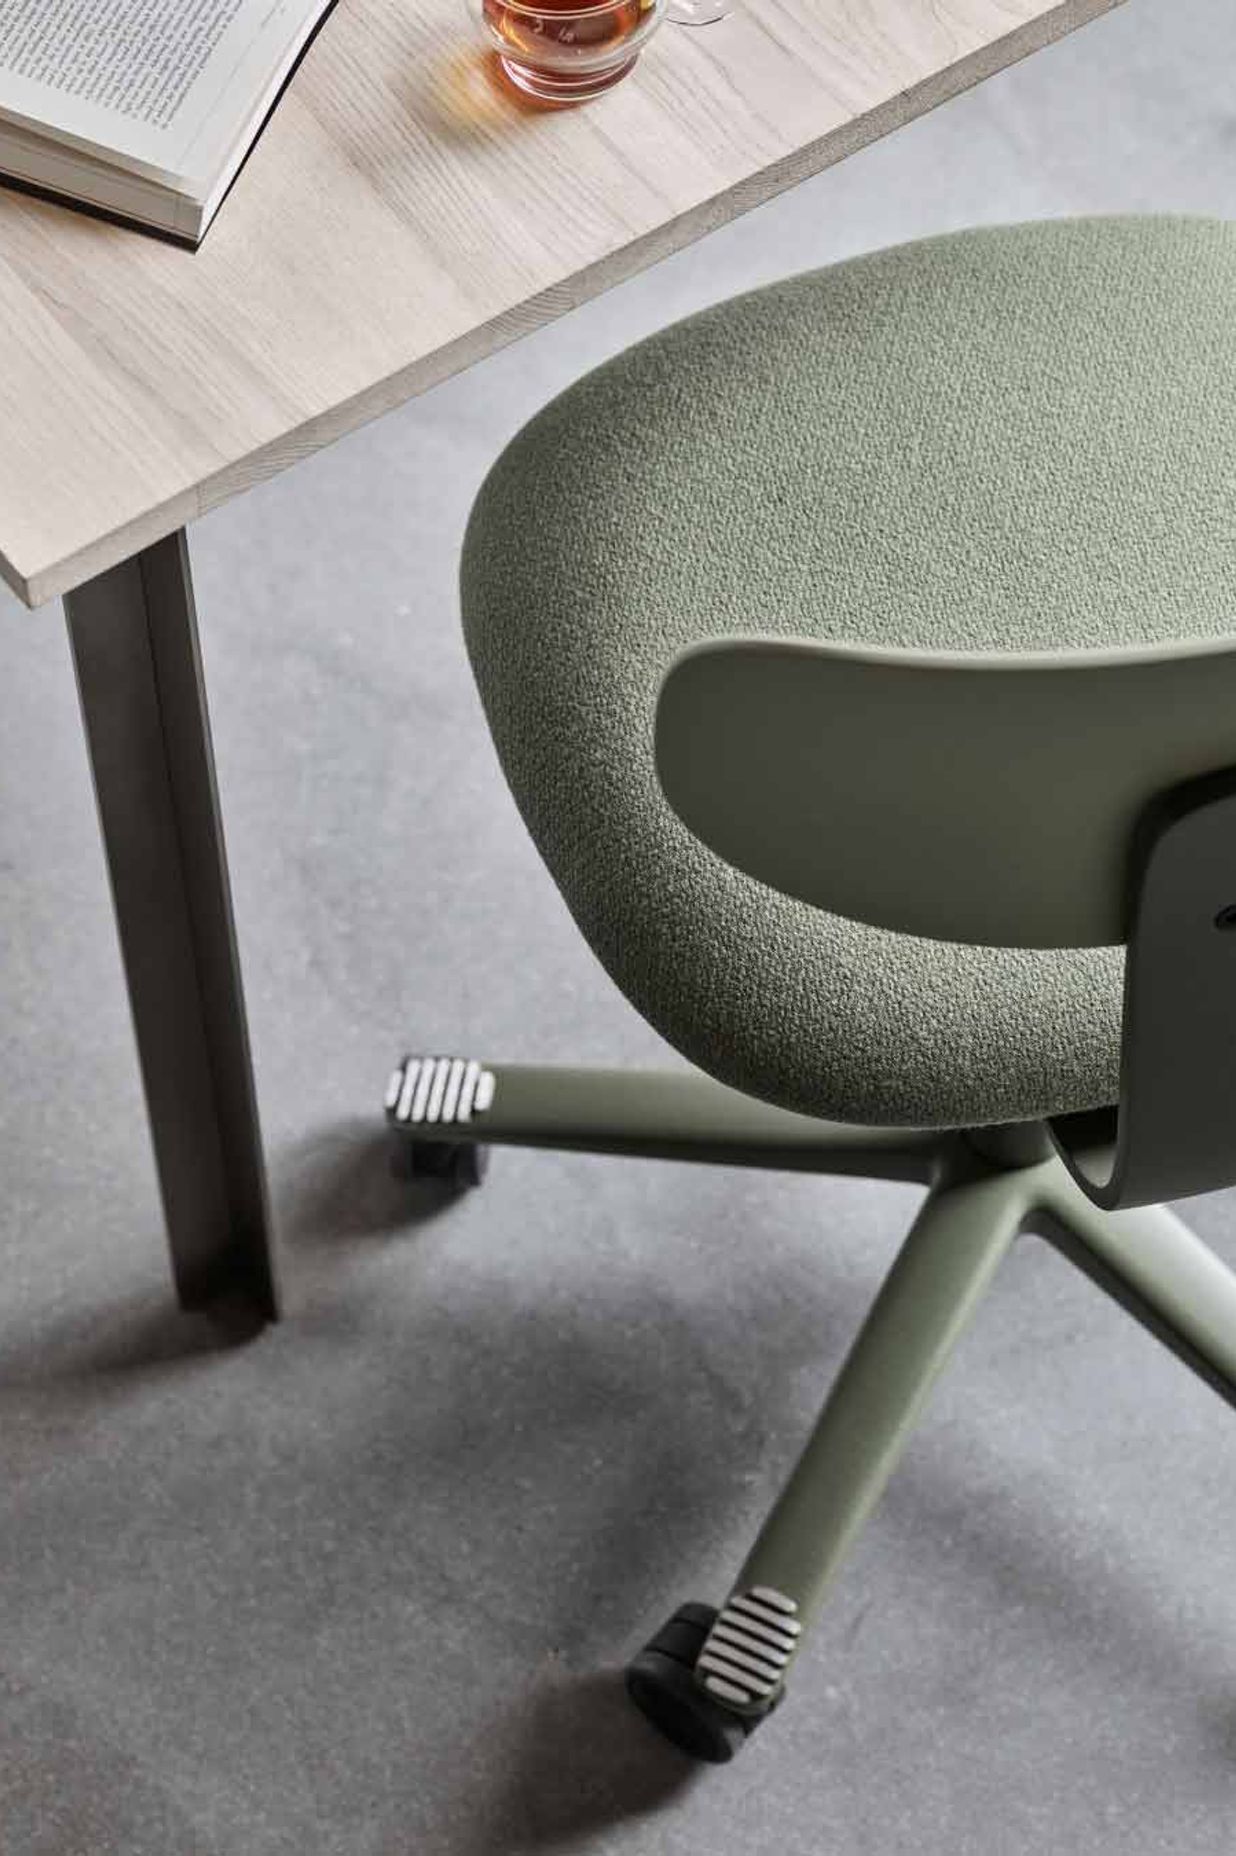 The HÅG Tion is one of the most sustainably designed task chairs available, made from 70-75% recycled materials | Ft. HÅG Tion 2140 in Moss Grey, with textile Cura 68261 by Gabriel